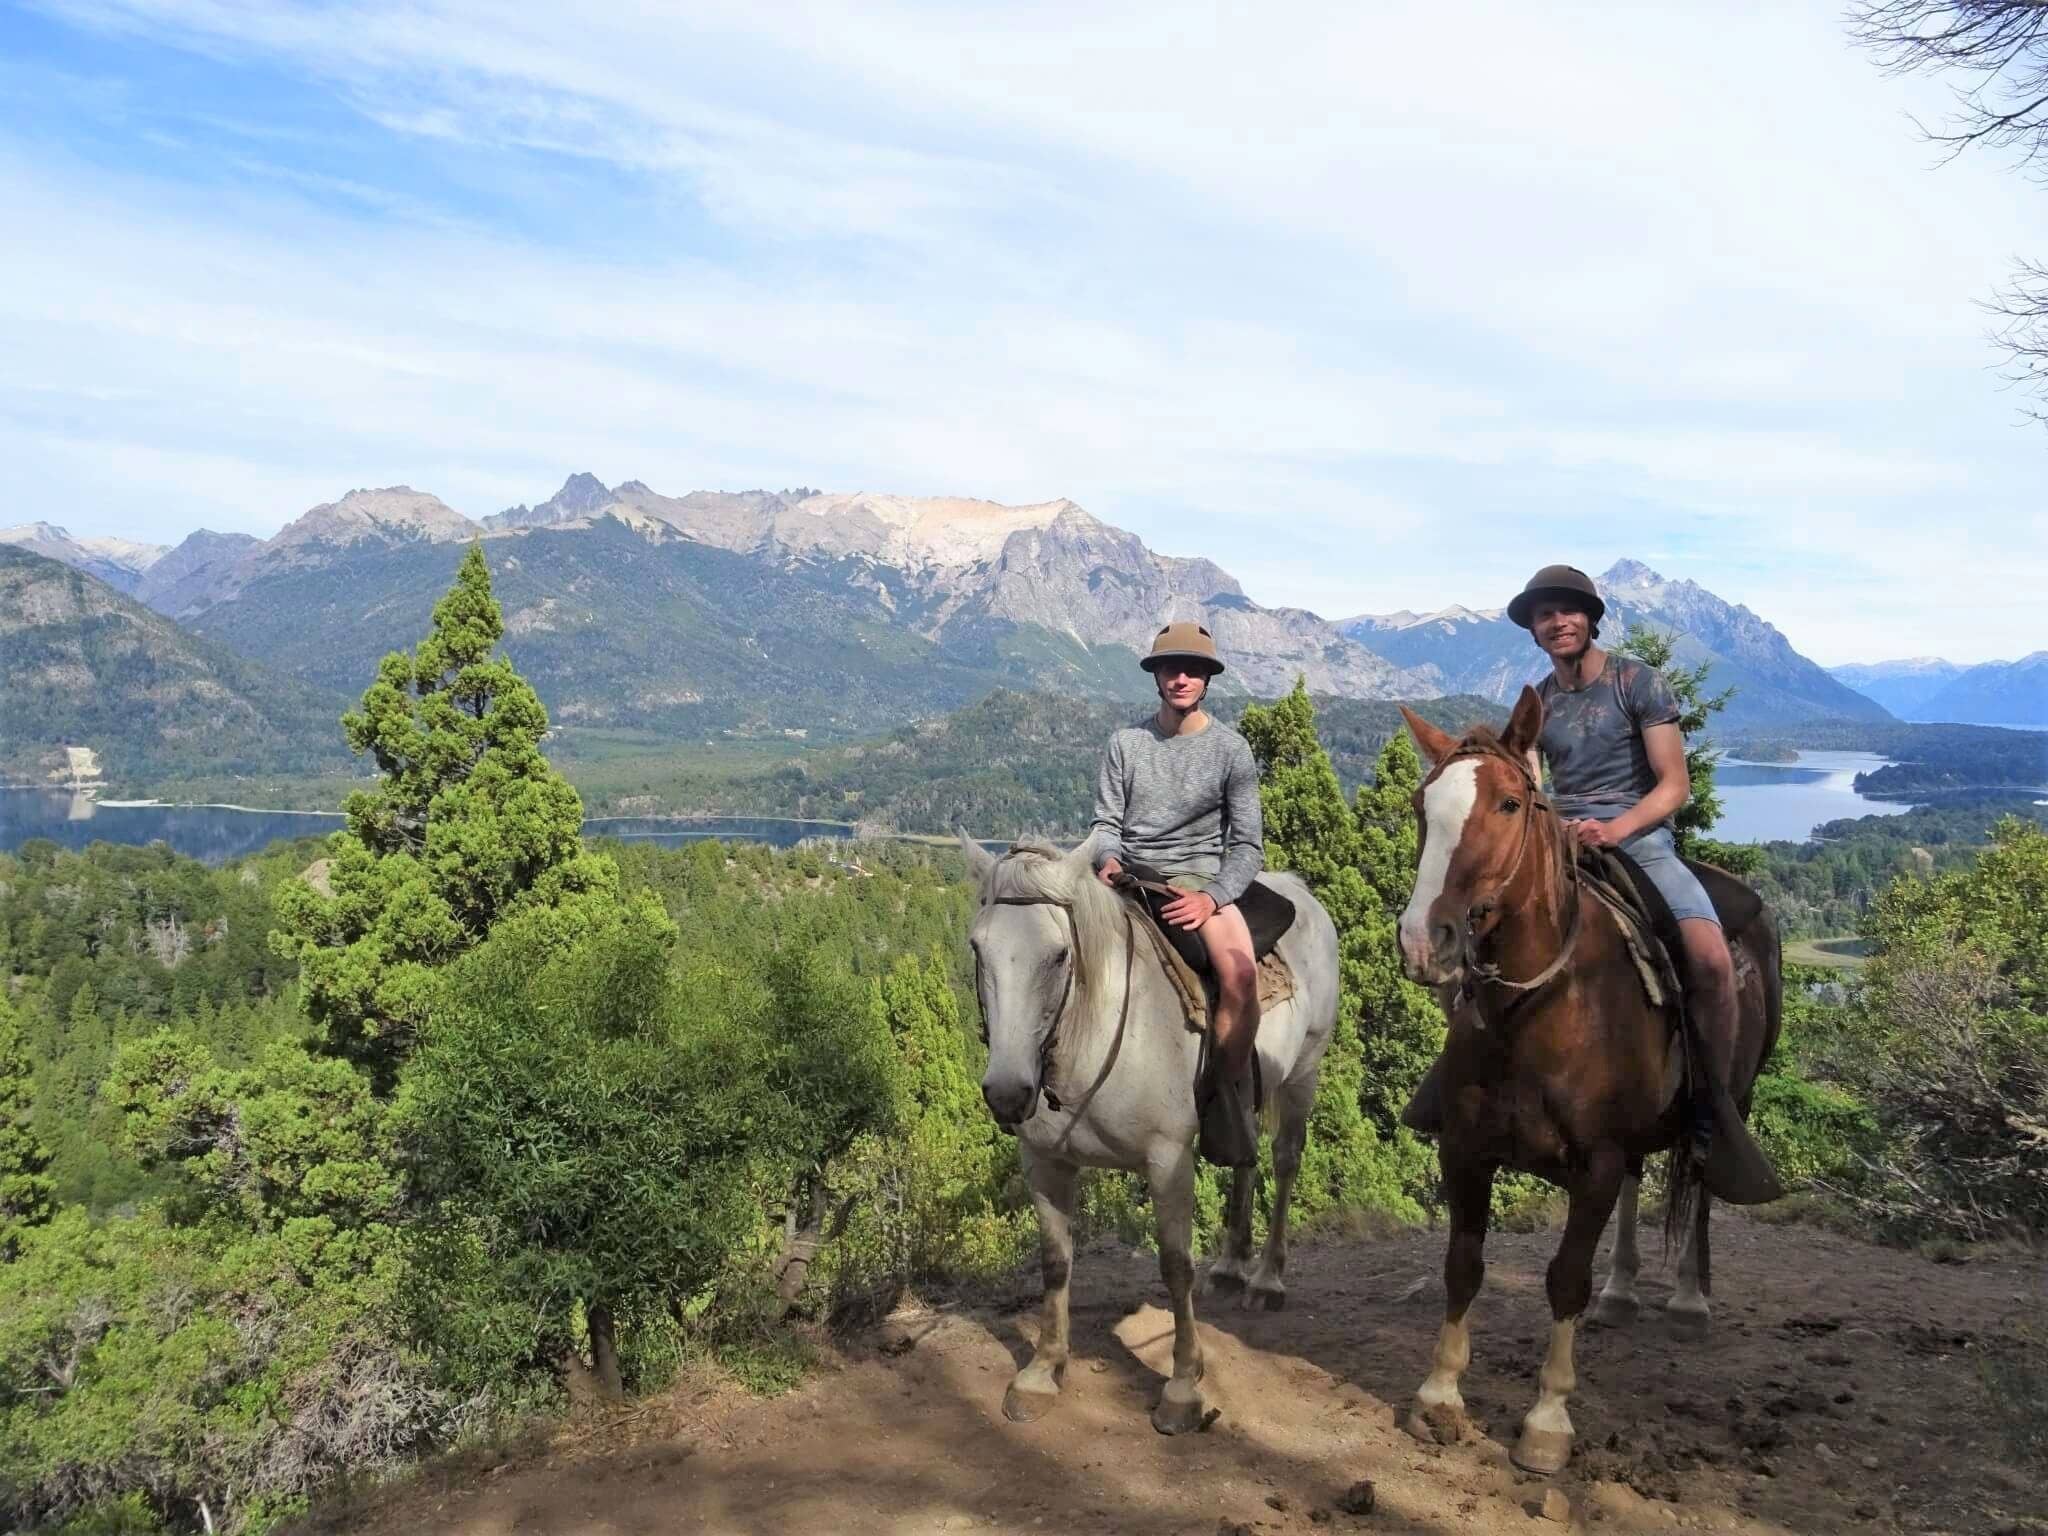 Horseback Riding in Patagoina with mountains and a river in the background